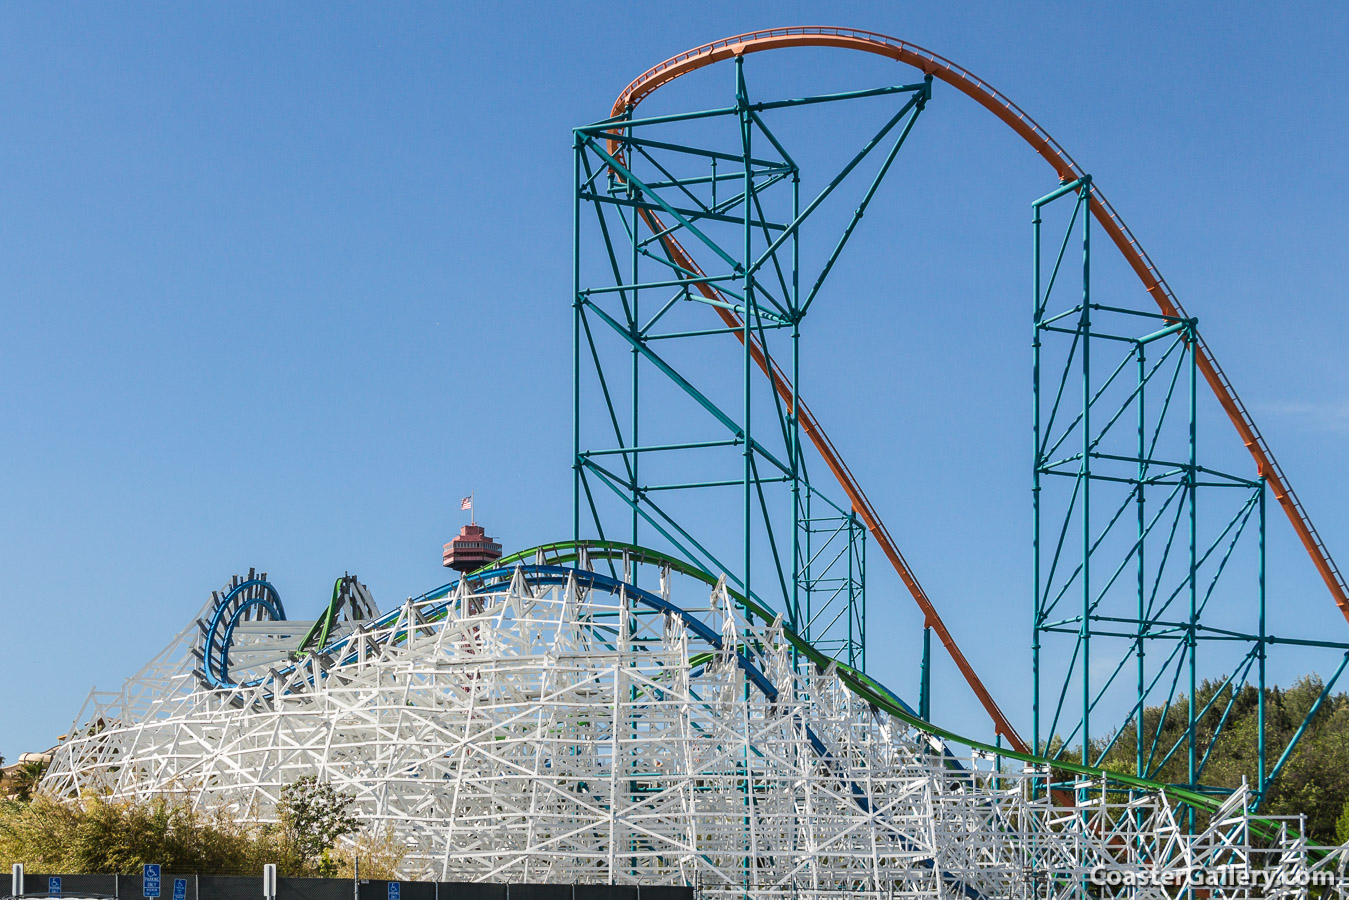 Pictures of Goliath and Colossus roller coasters.